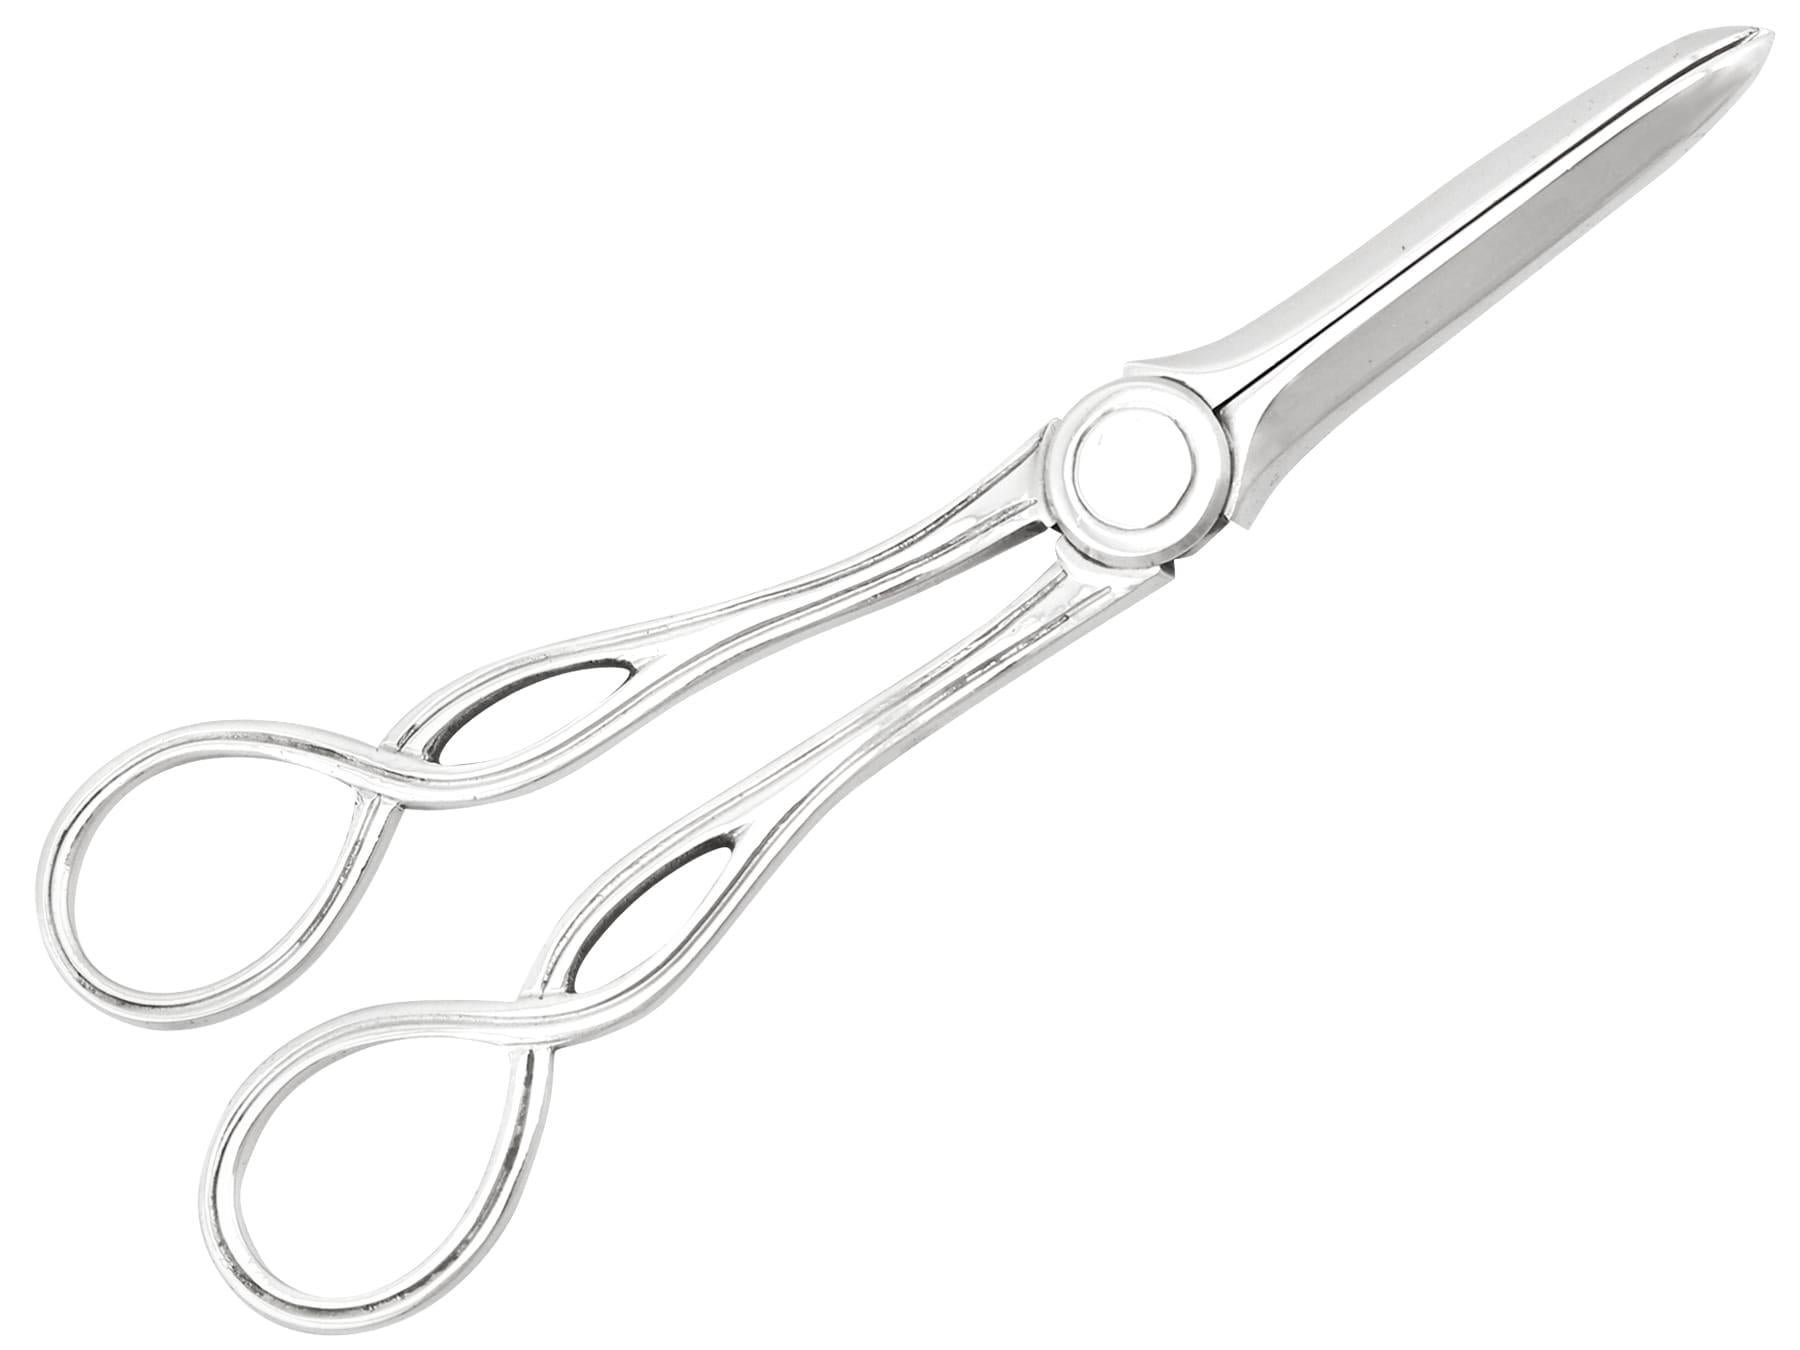 An exceptional, fine and impressive pair of antique Victorian English sterling silver grape shears, boxed, an addition to our silver flatware collection.

These exceptional antique Victorian sterling silver grape shears have a hinged scissor